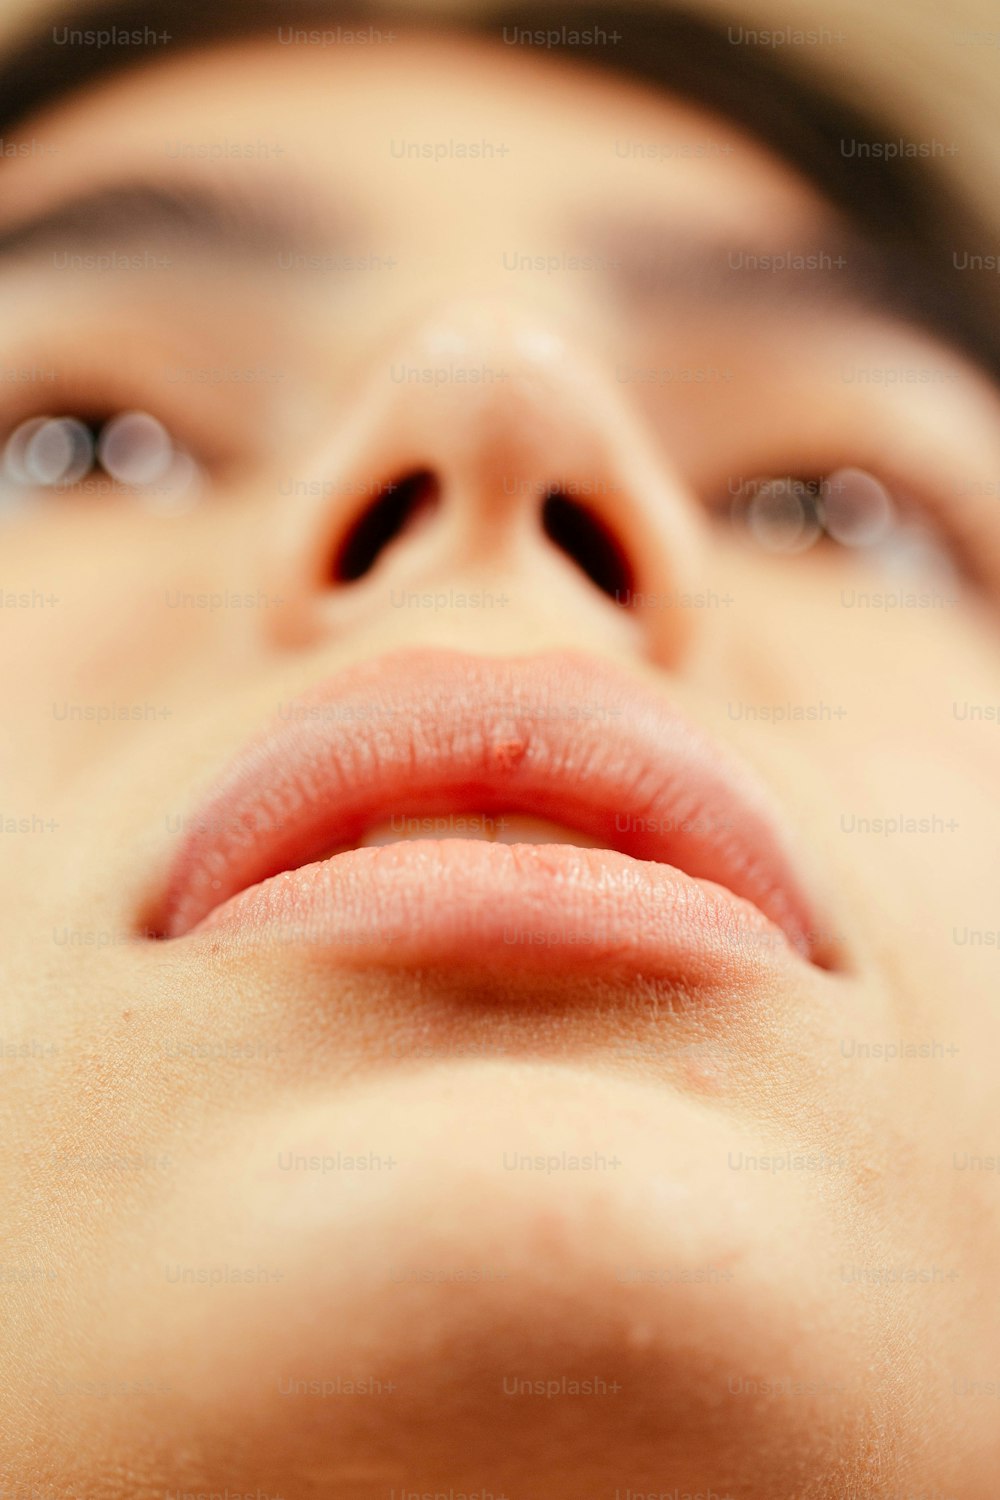 a close up of a woman's face with a tooth brush in her mouth